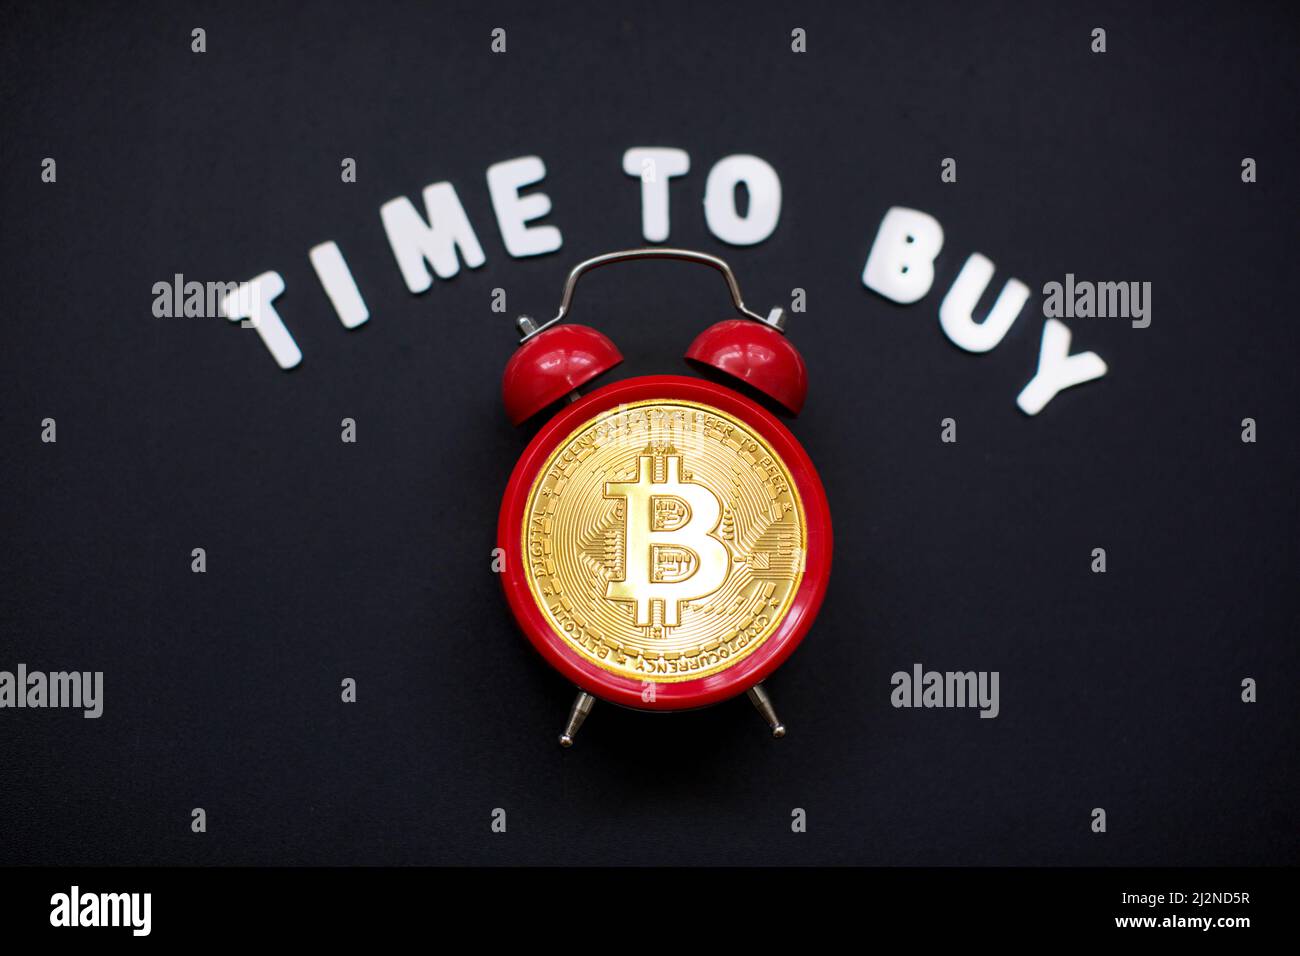 Bitcoin and alarm clock and sign 'time to buy'. Concept of deadline to invest in bitcoin cryptocurrency. Stock Photo